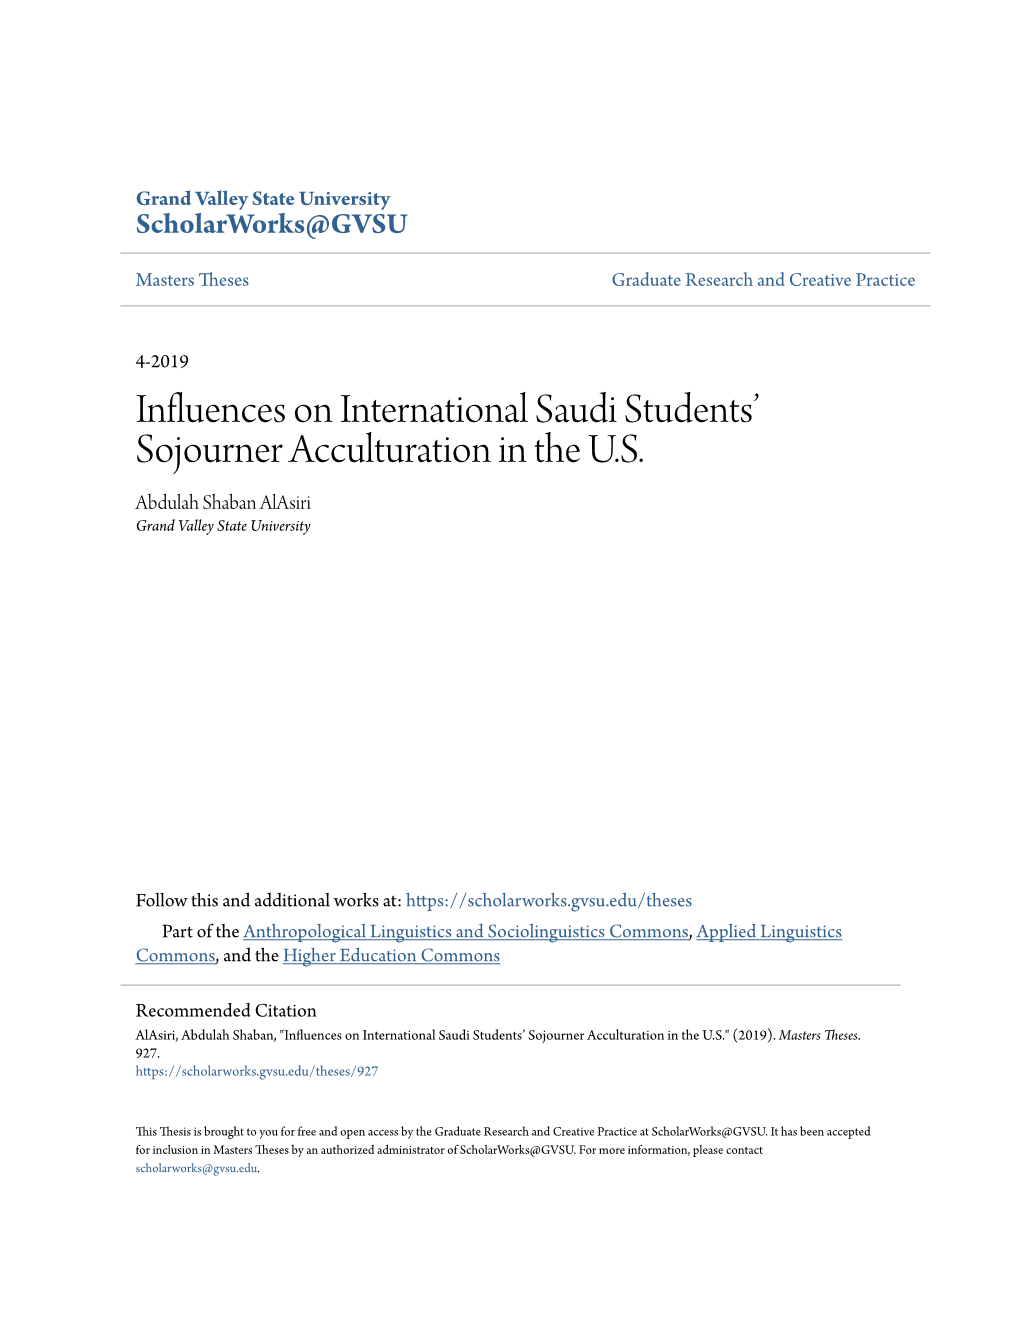 Influences on International Saudi Students' Sojourner Acculturation In